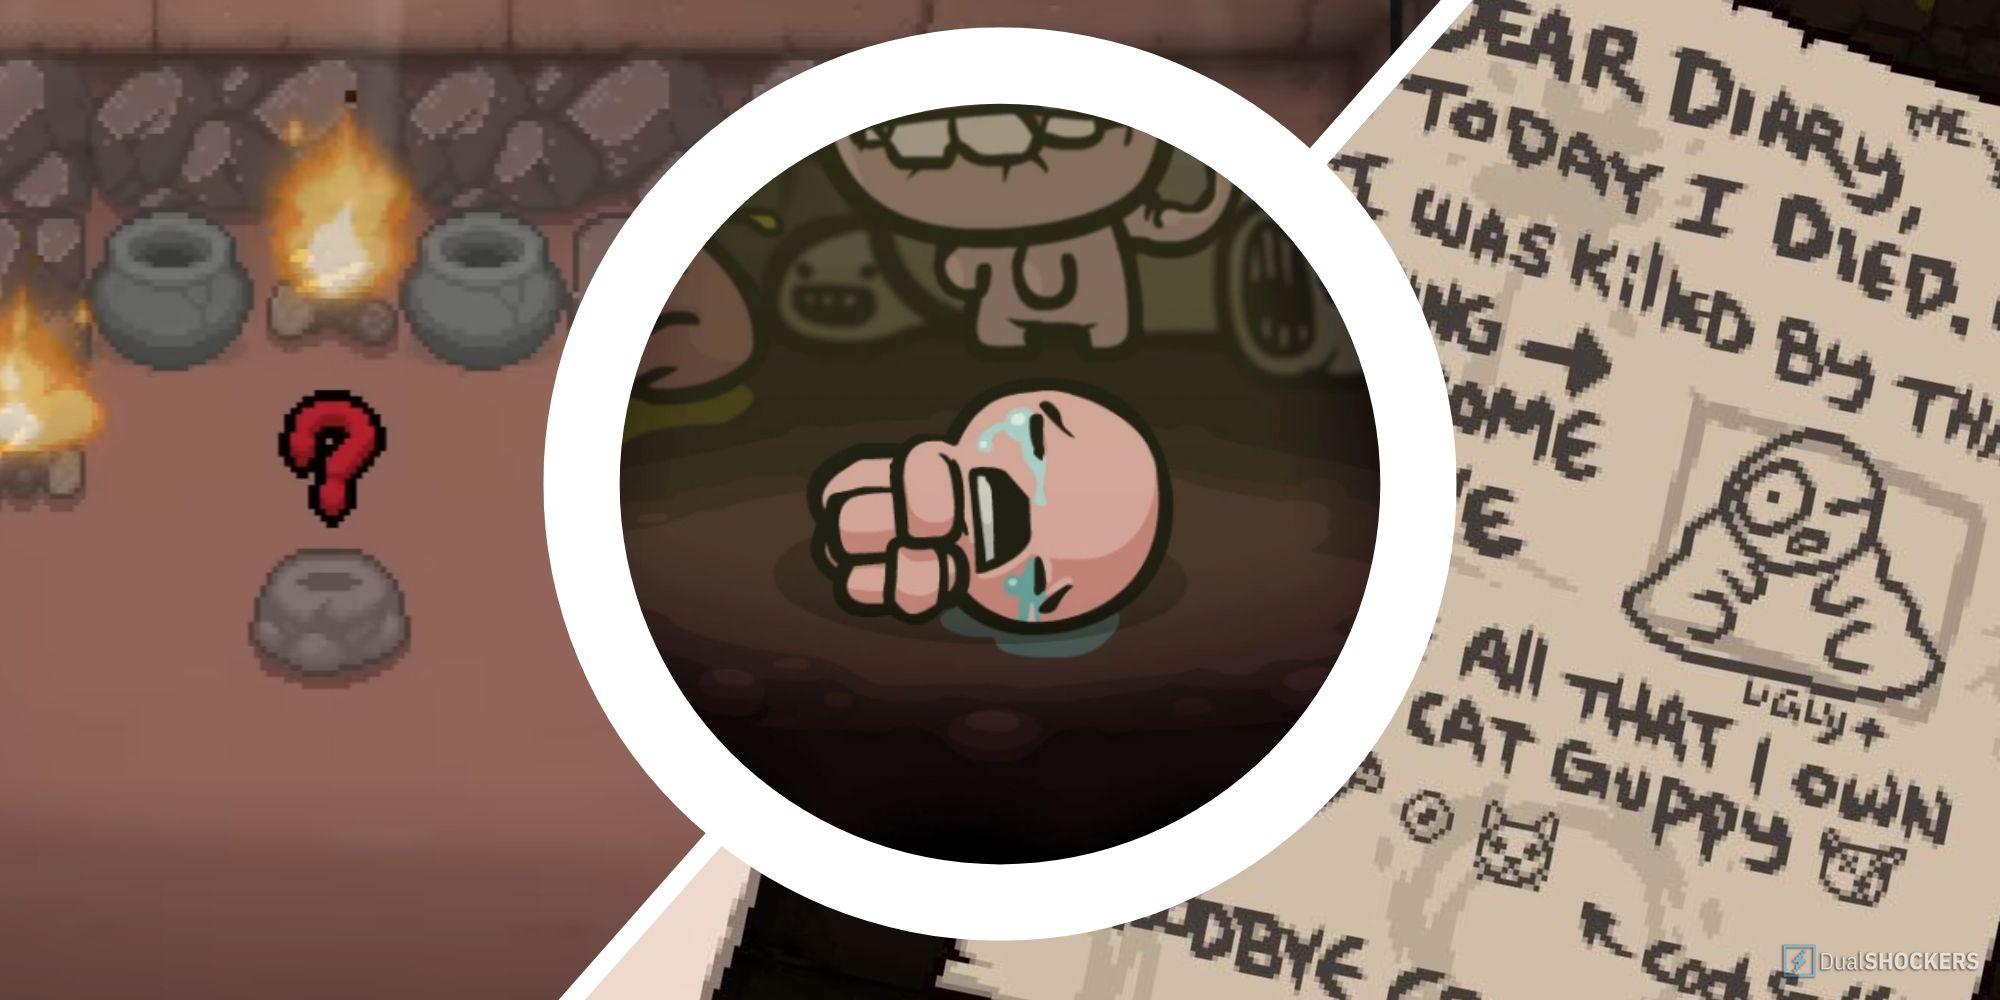 Left to right: A blind item on a pedestal, Isaac crying on the ground, TBOI game over screen